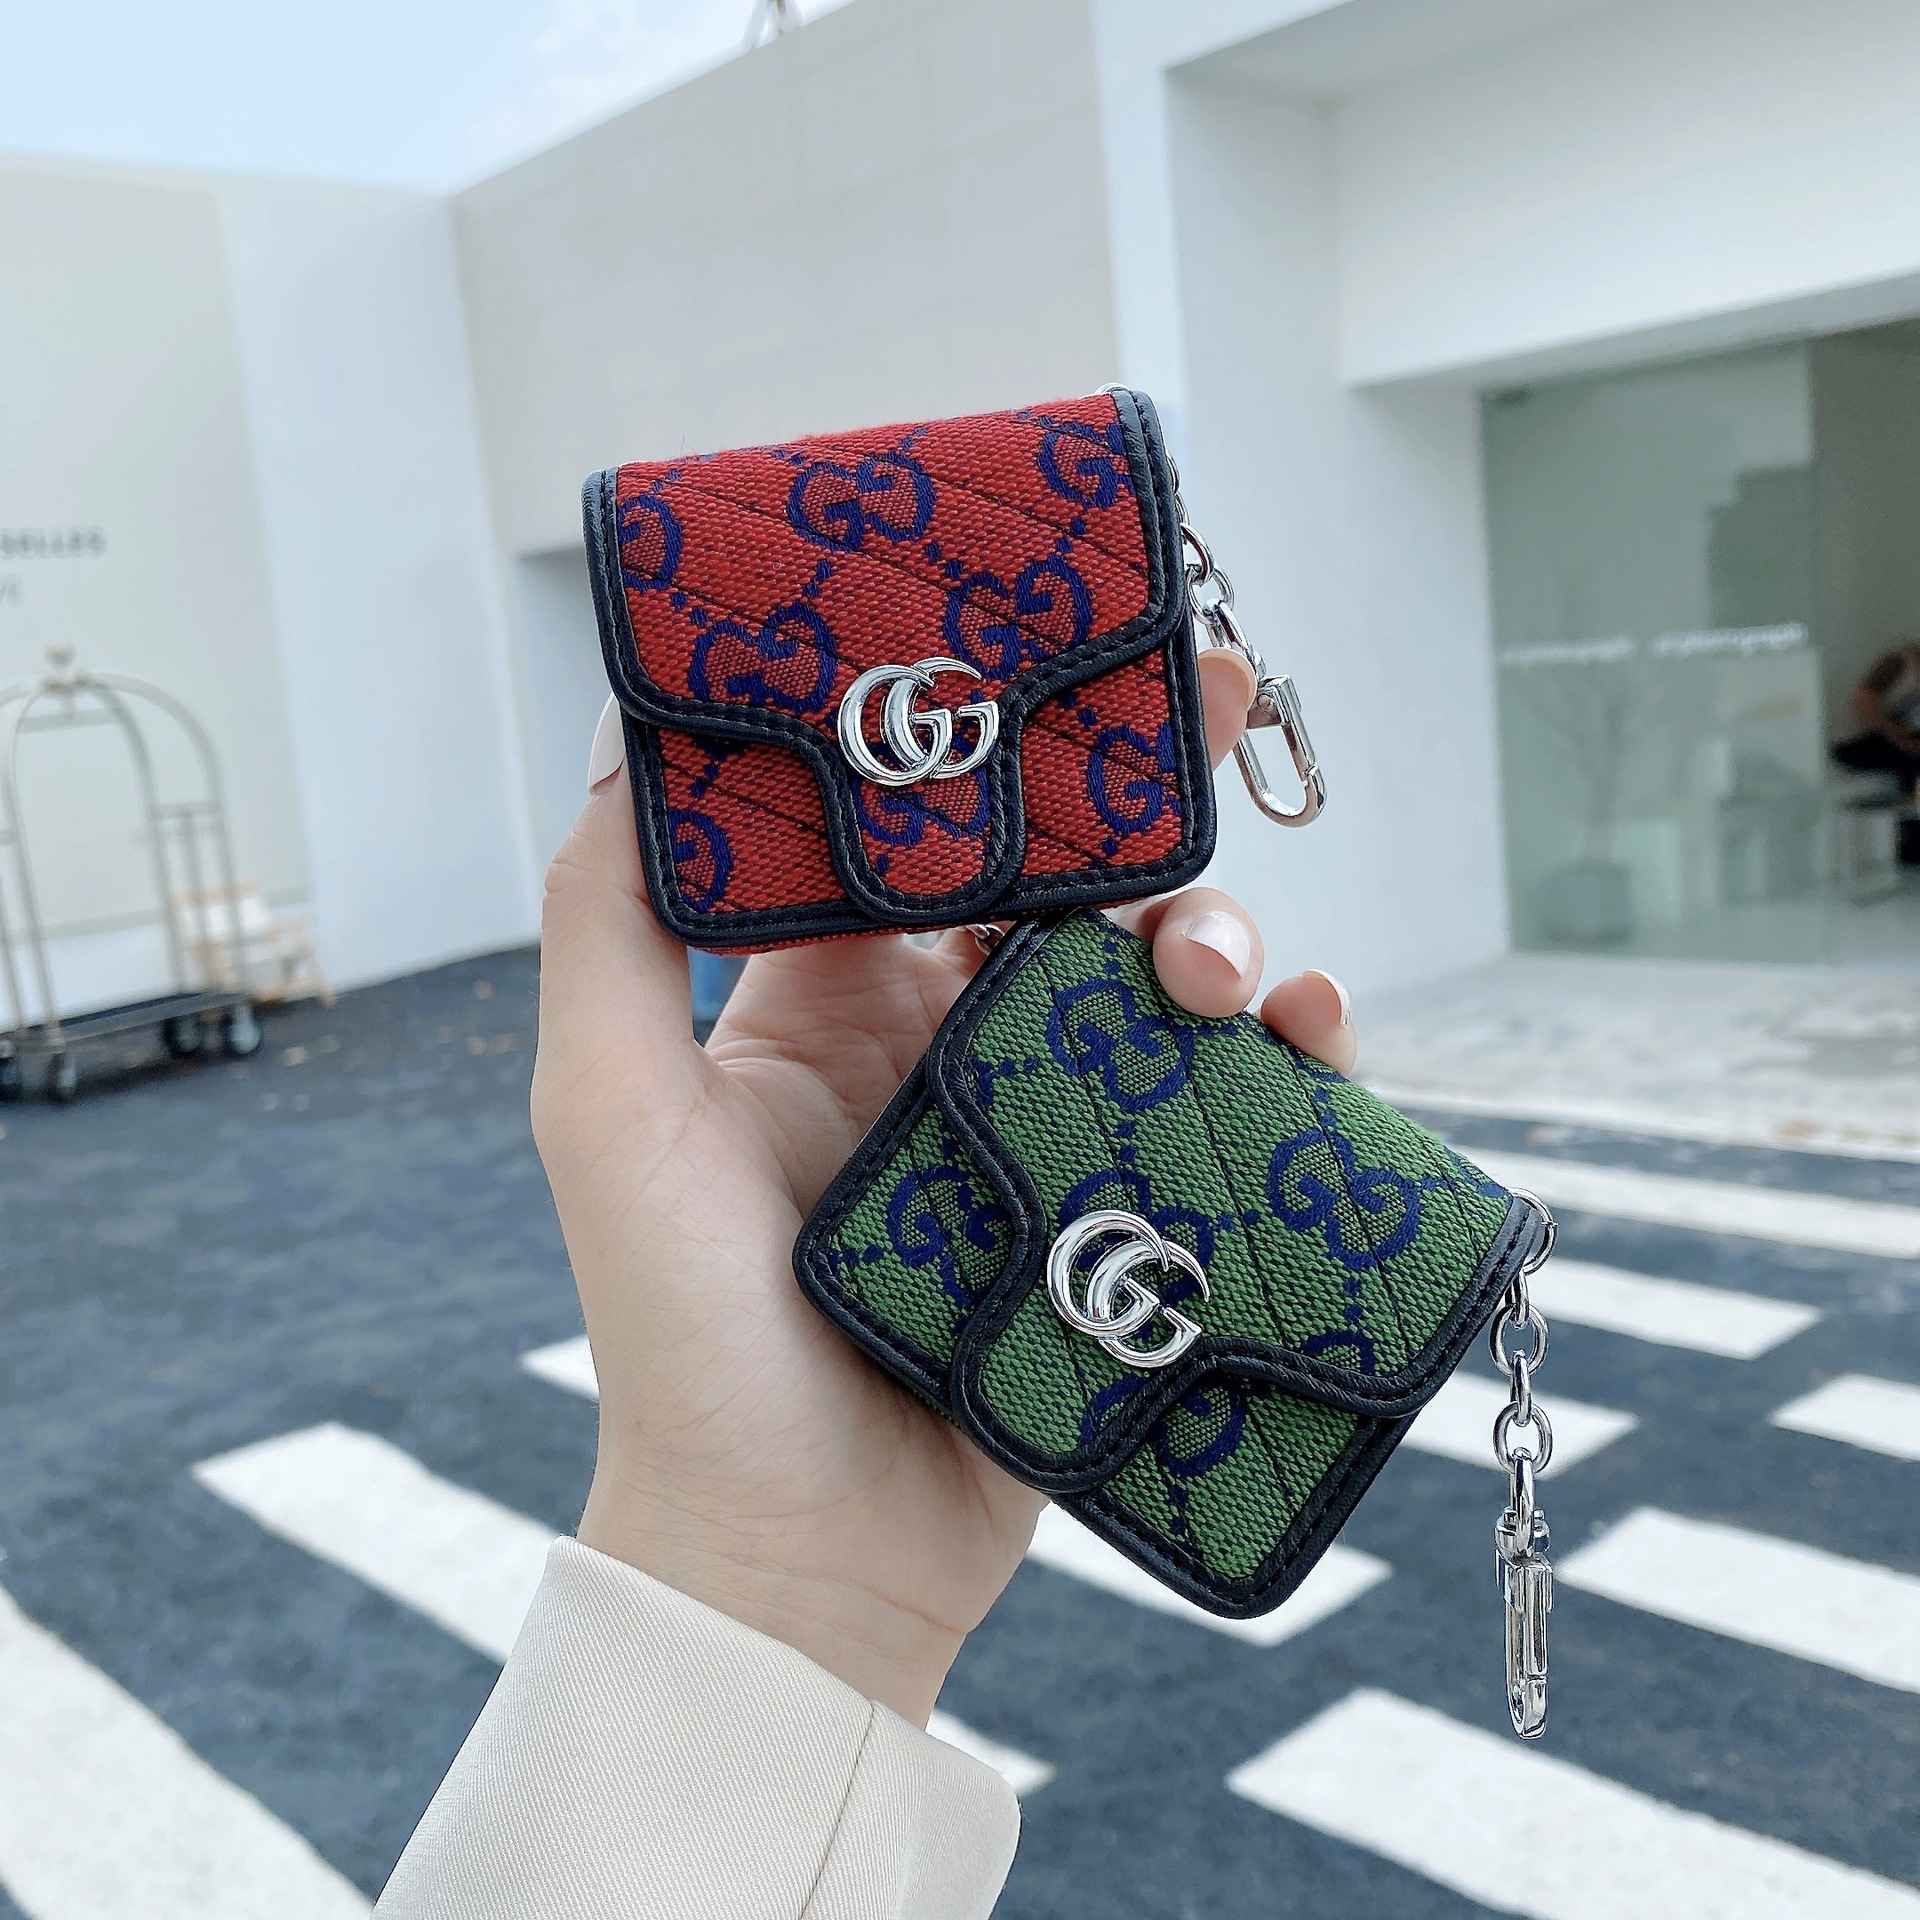 Gucci earphone case with chain